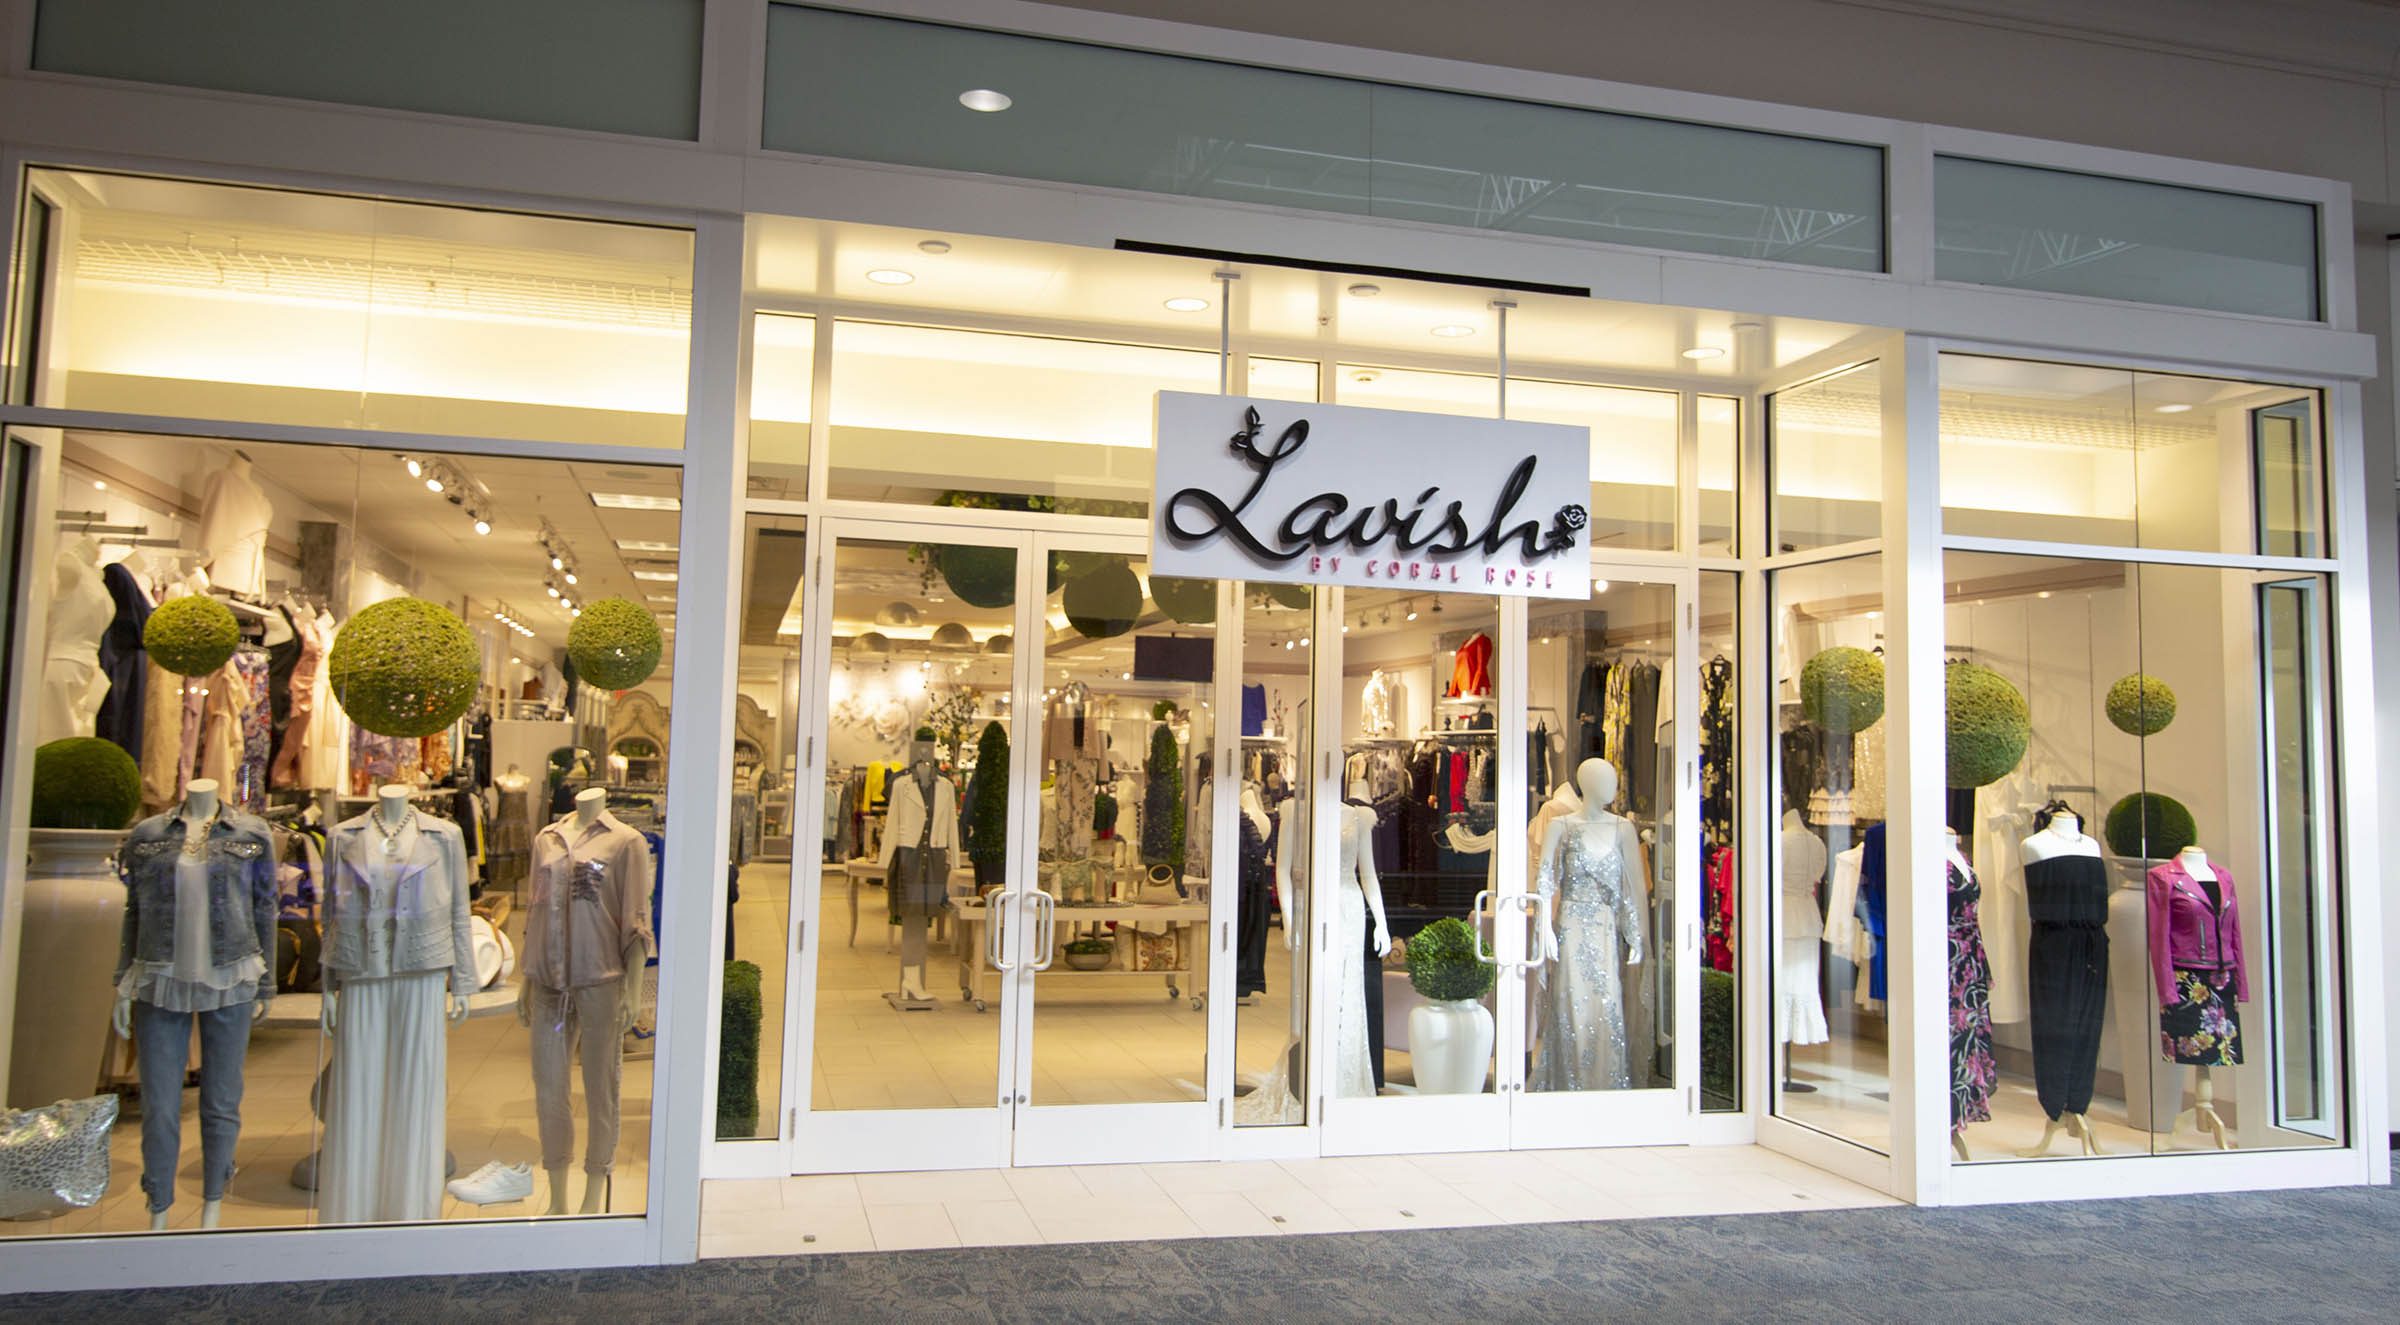 Lavish storefront at the Eastwood Mall in Niles, Ohio